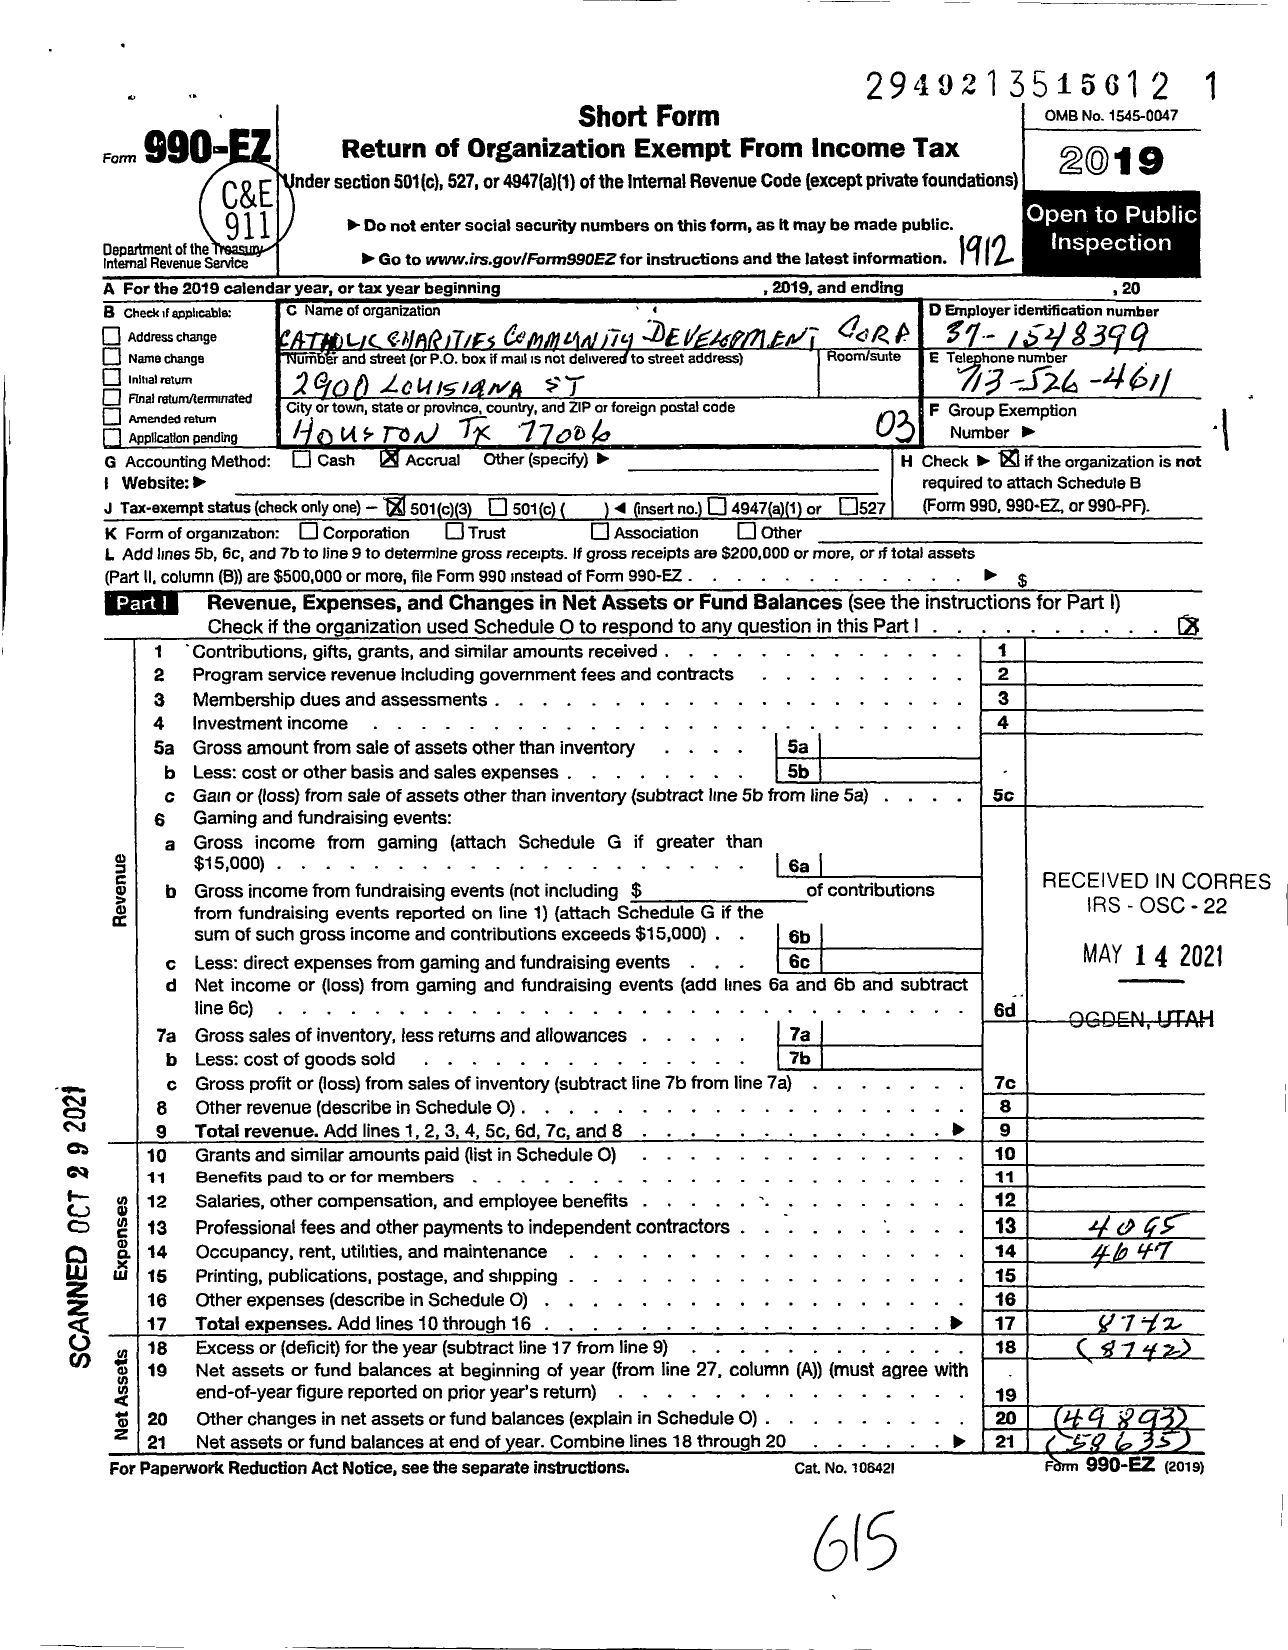 Image of first page of 2019 Form 990EZ for Catholic Charities Community Development Corporation